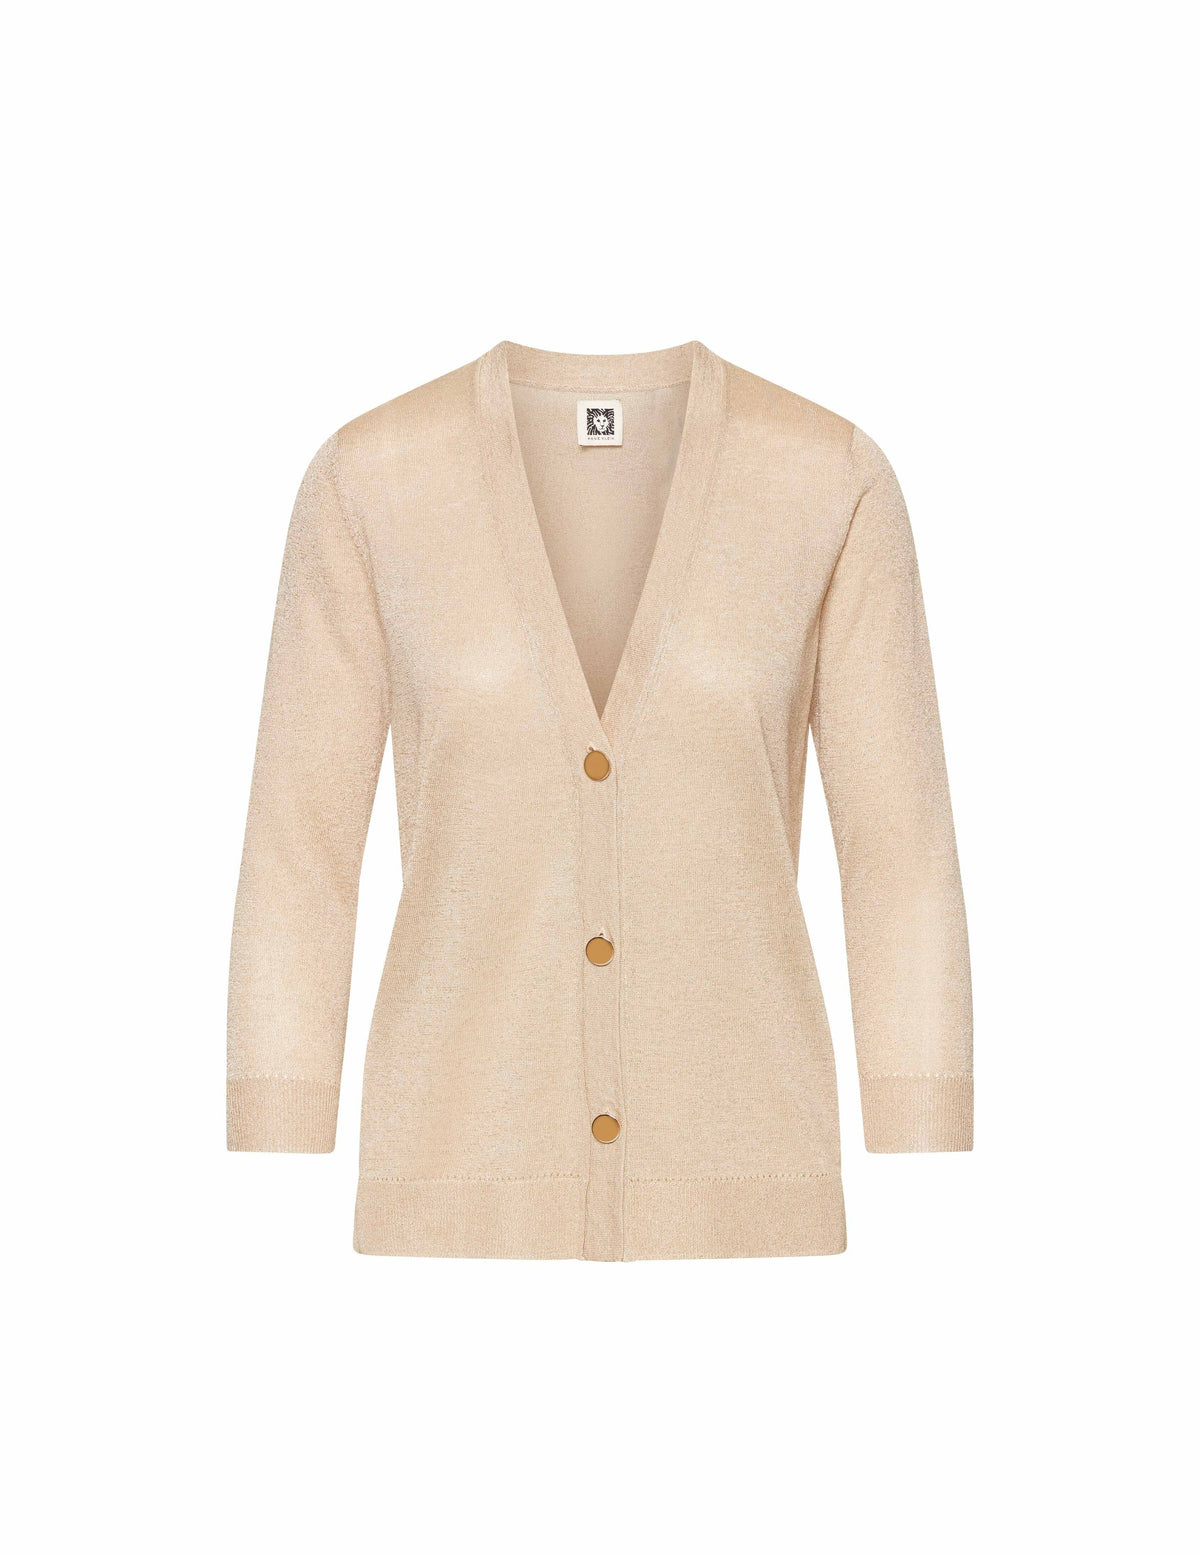 Anne Klein Light Gold 3/4 Sleeve Cardigan With Hi-low Hem- Clearance